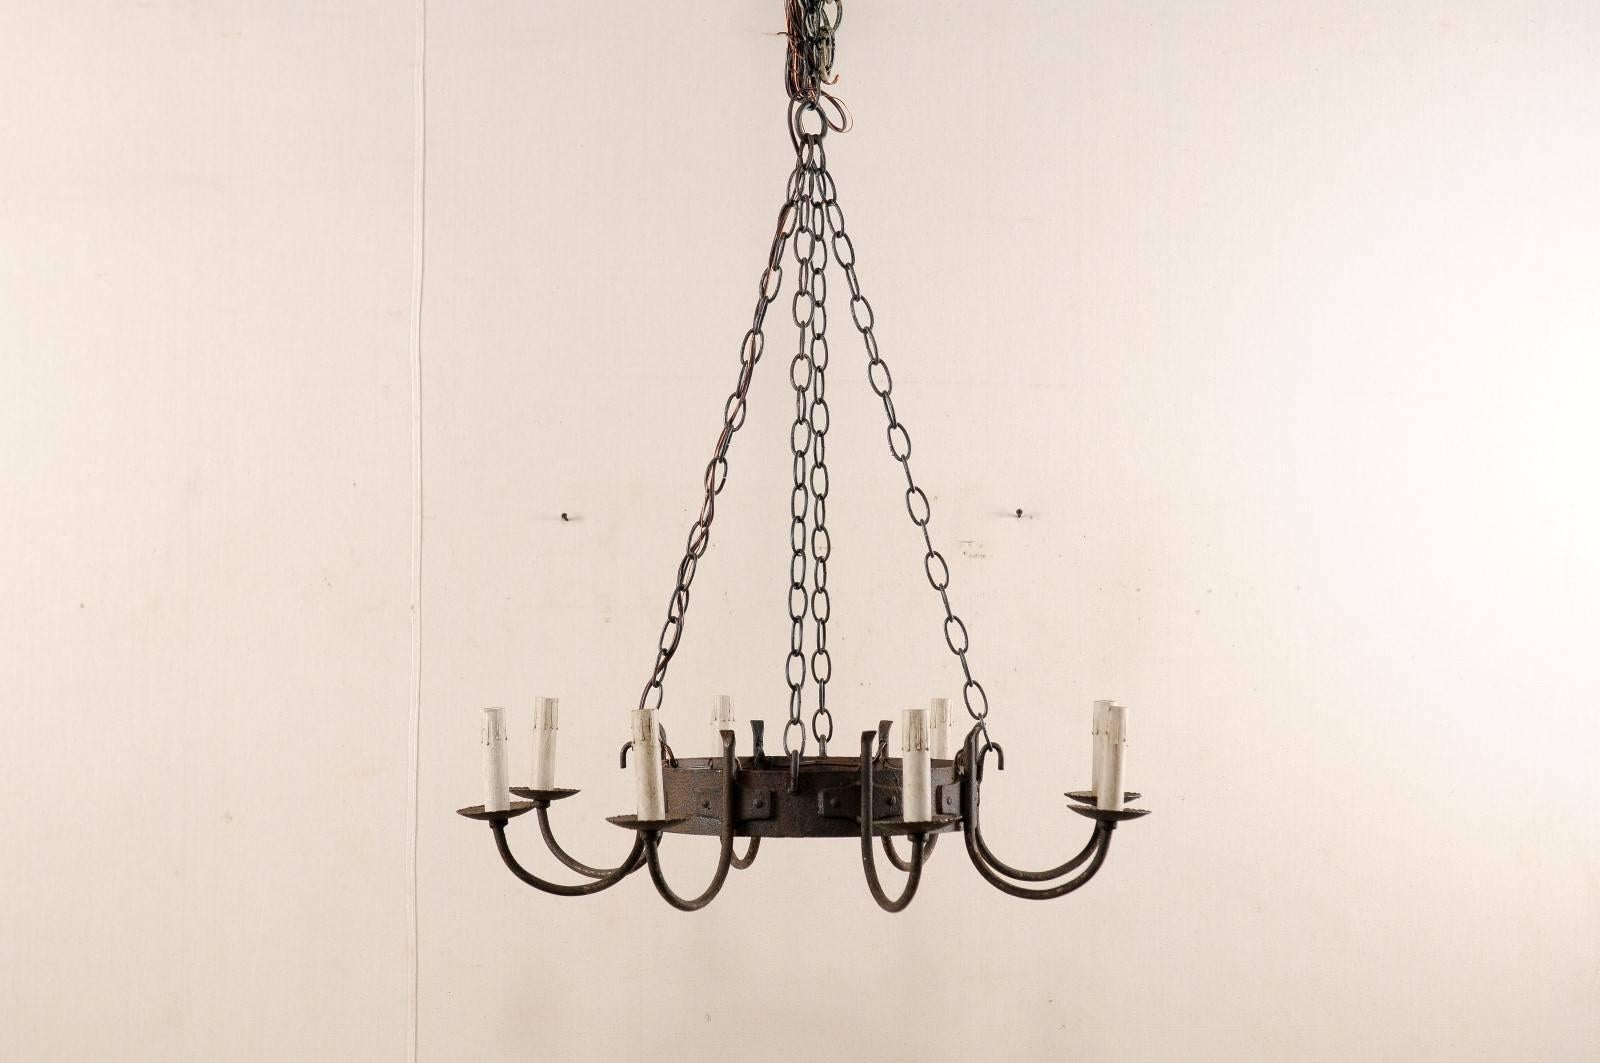 Patinated French Mid-20th Century Eight-Light Chandelier with Nicely Aged Iron Ring